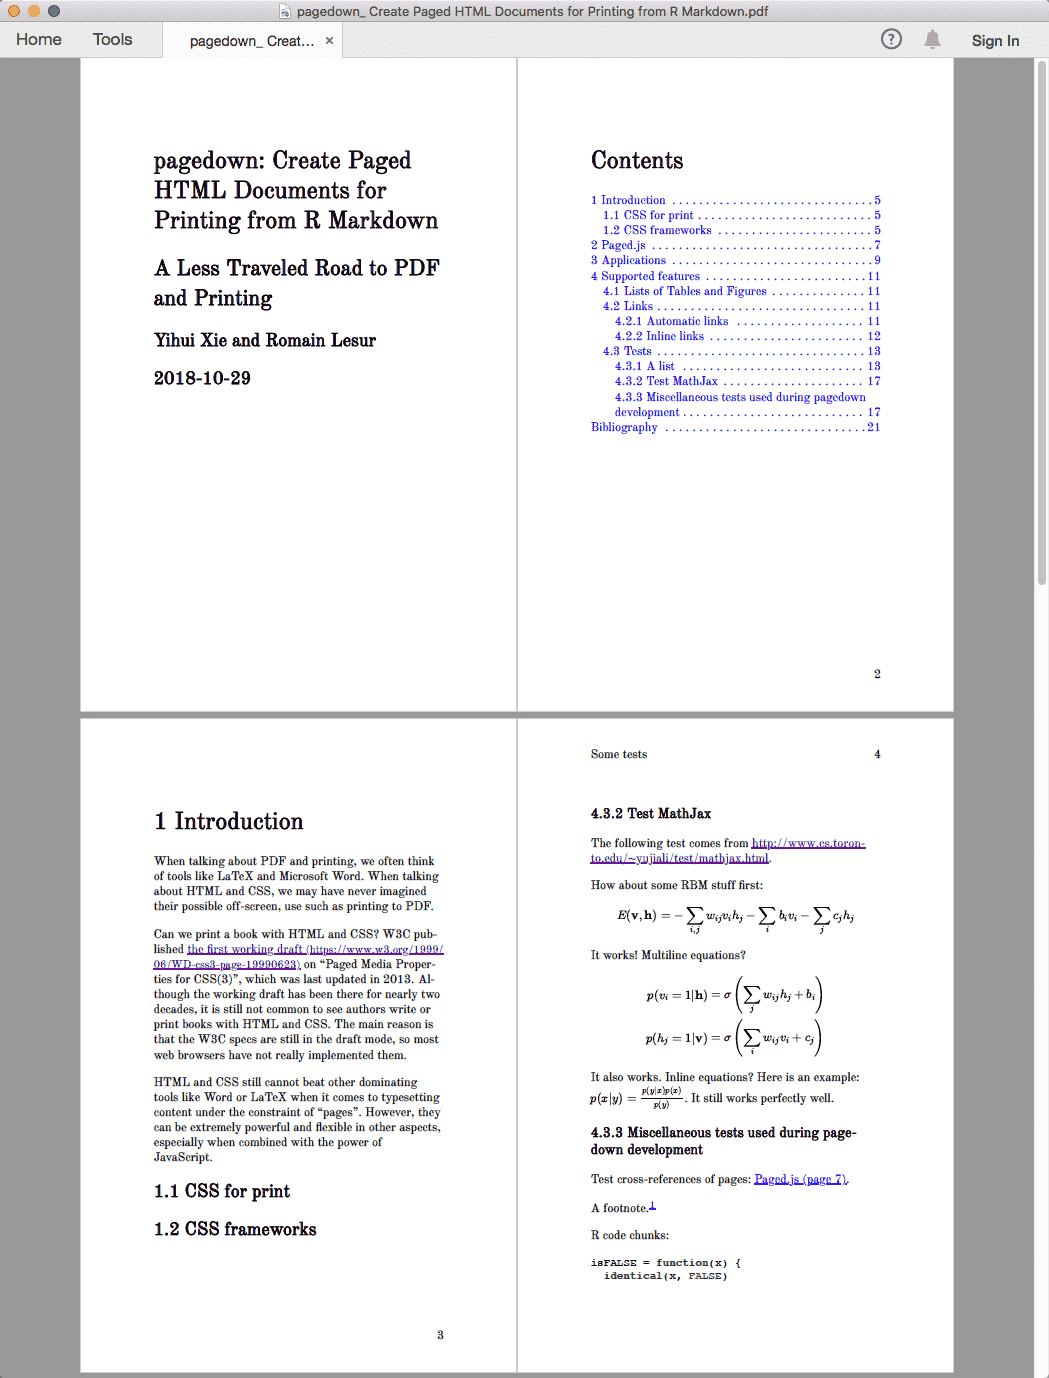 html document of 4 pages